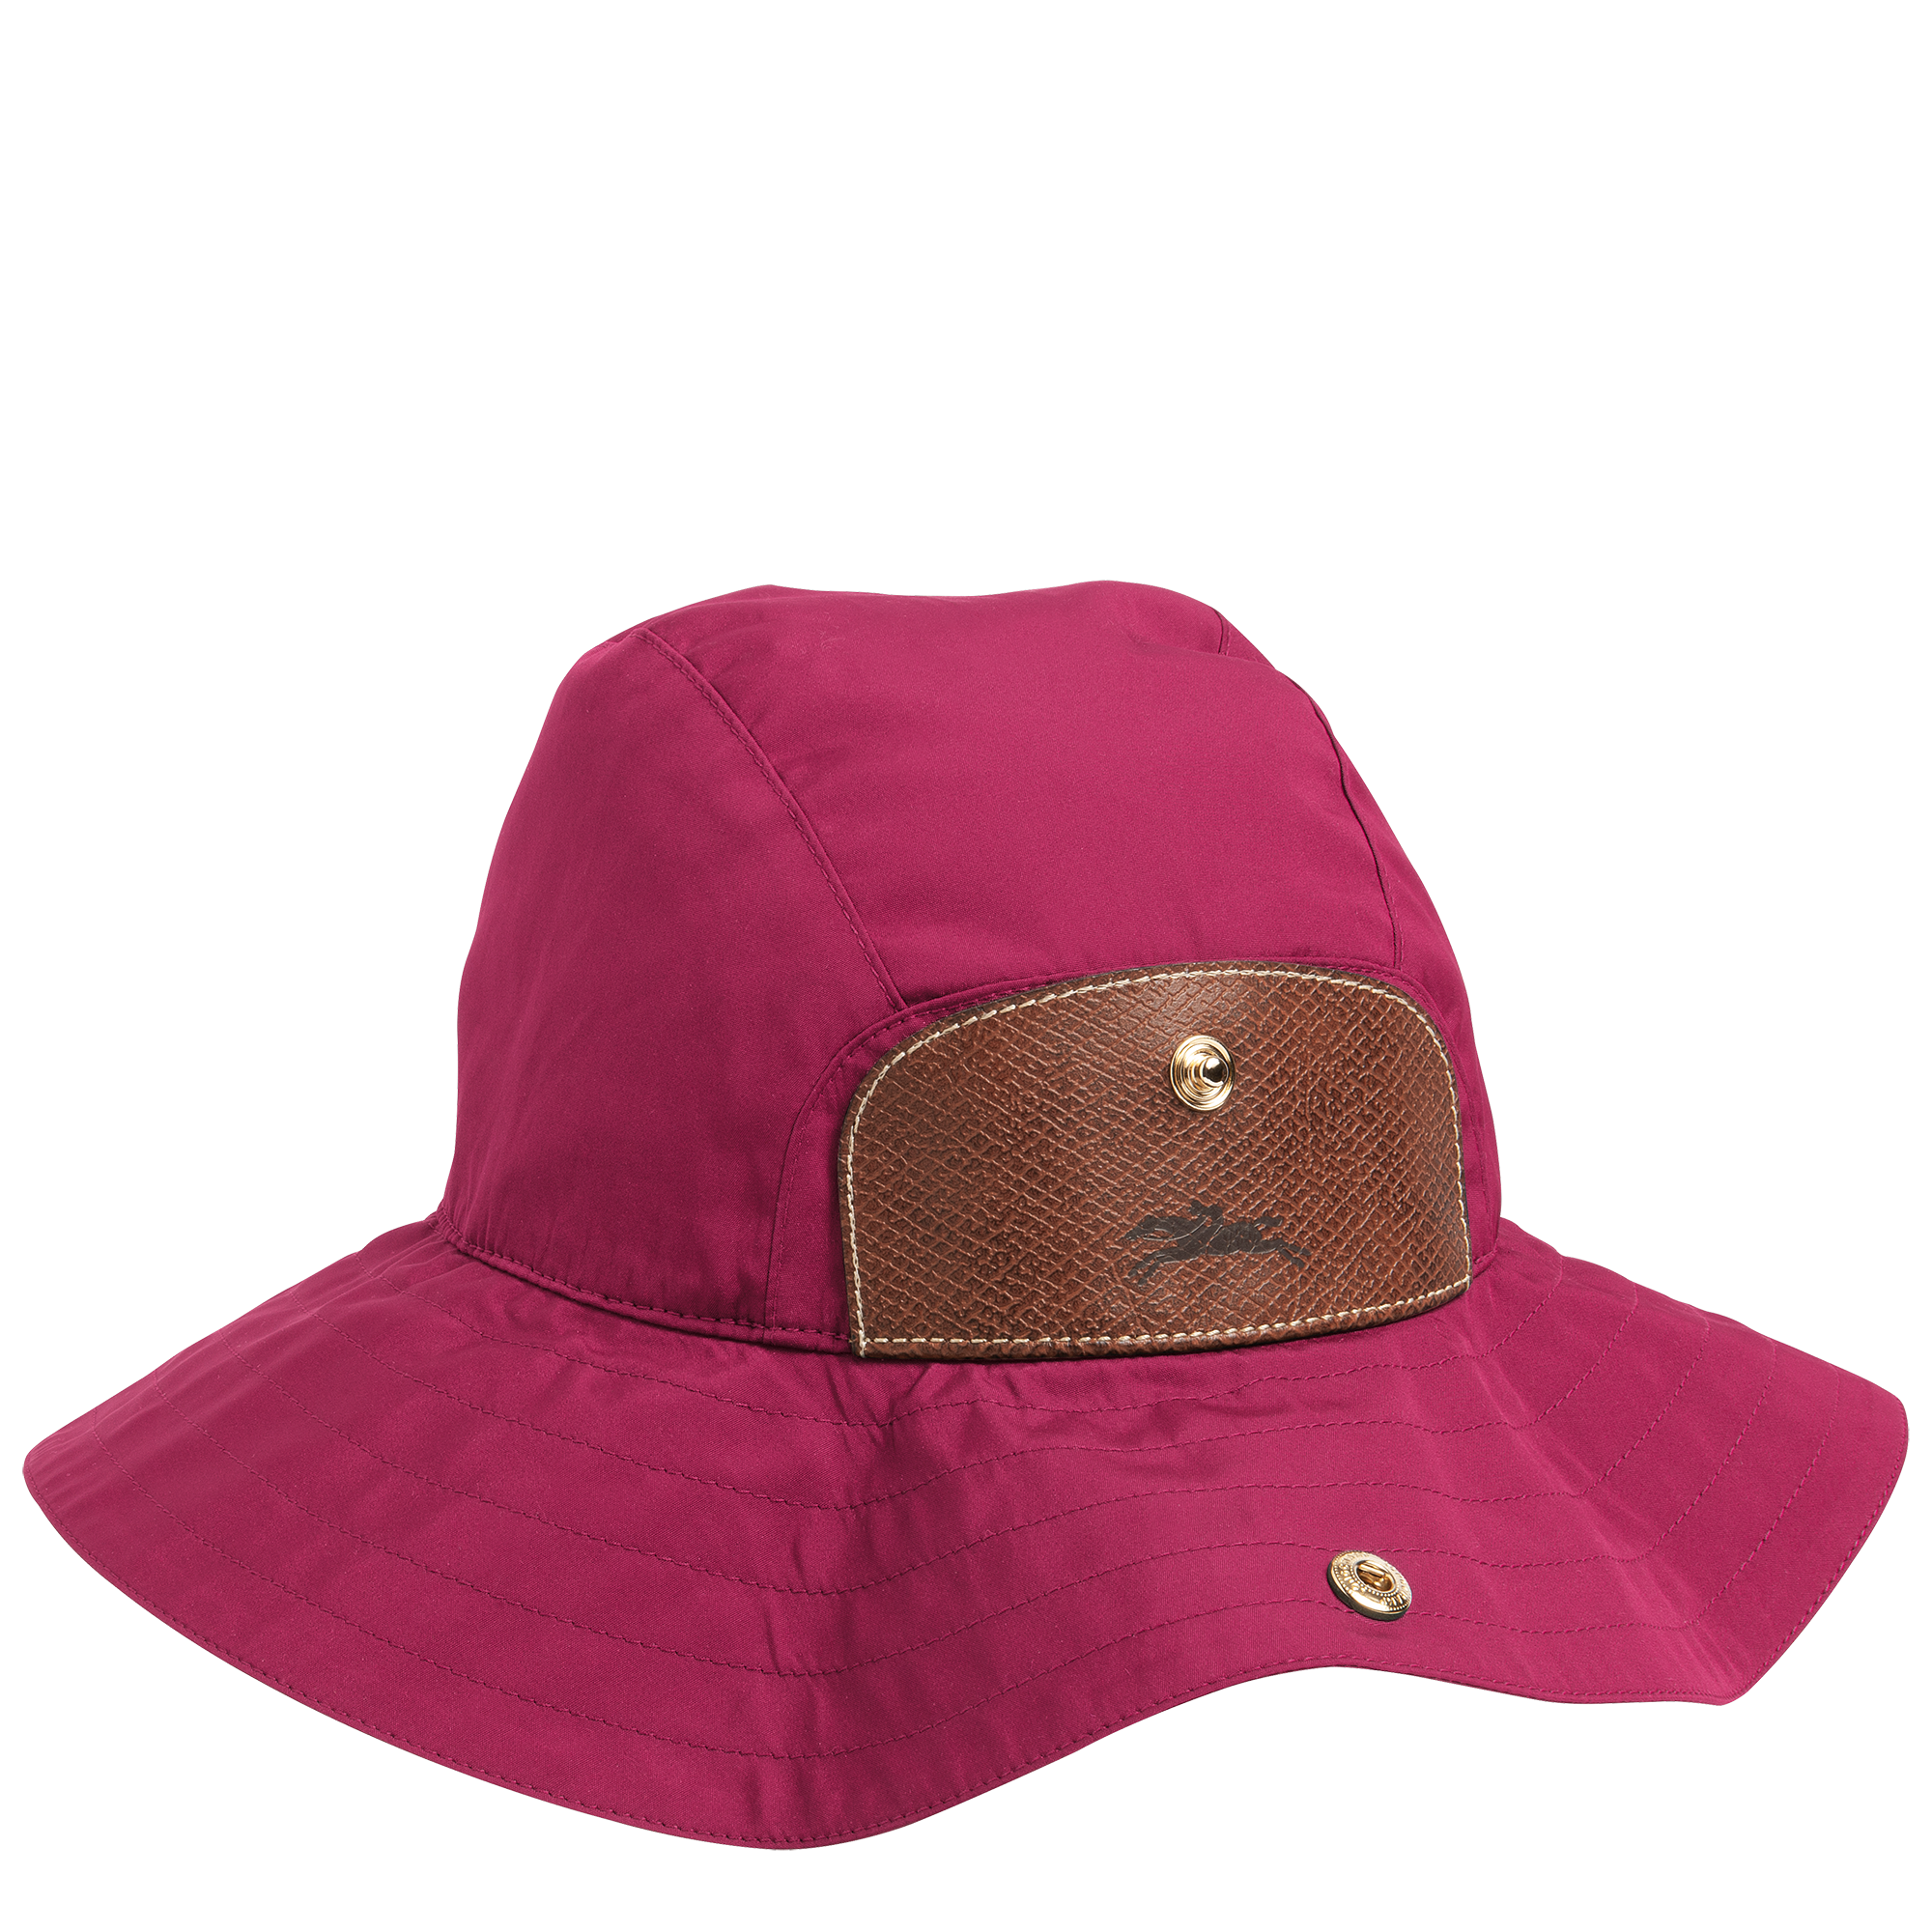 Longchamp X D_heygere pink hat Php 18,000.png